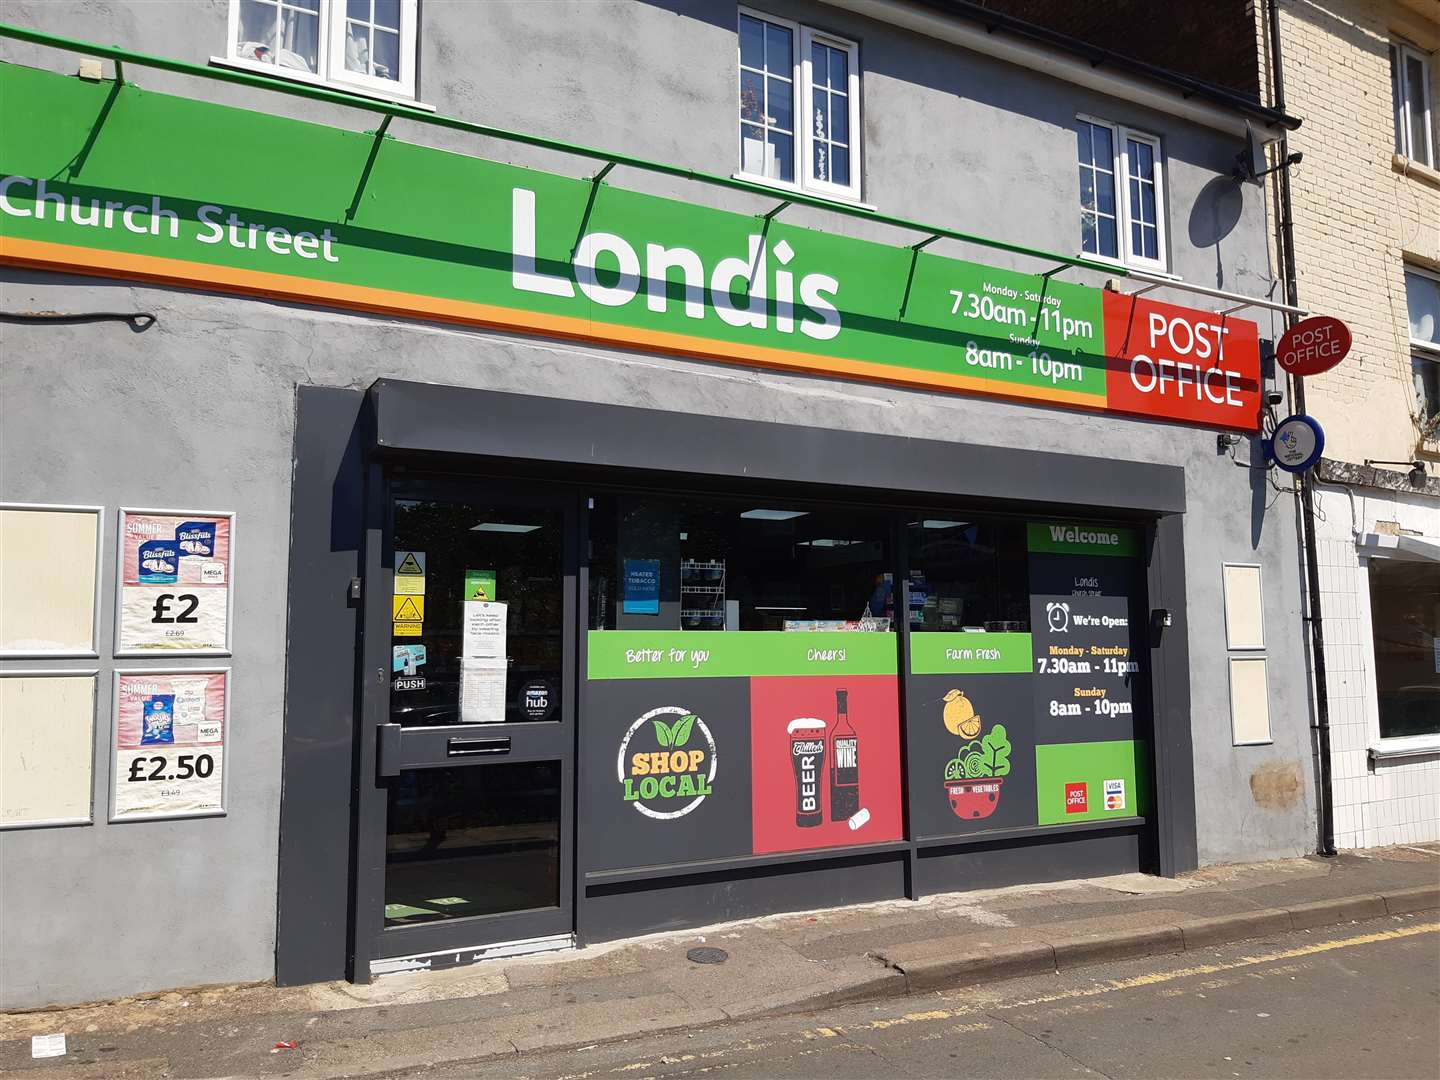 The Londis Post Office and Stores in Tovil has also been affected